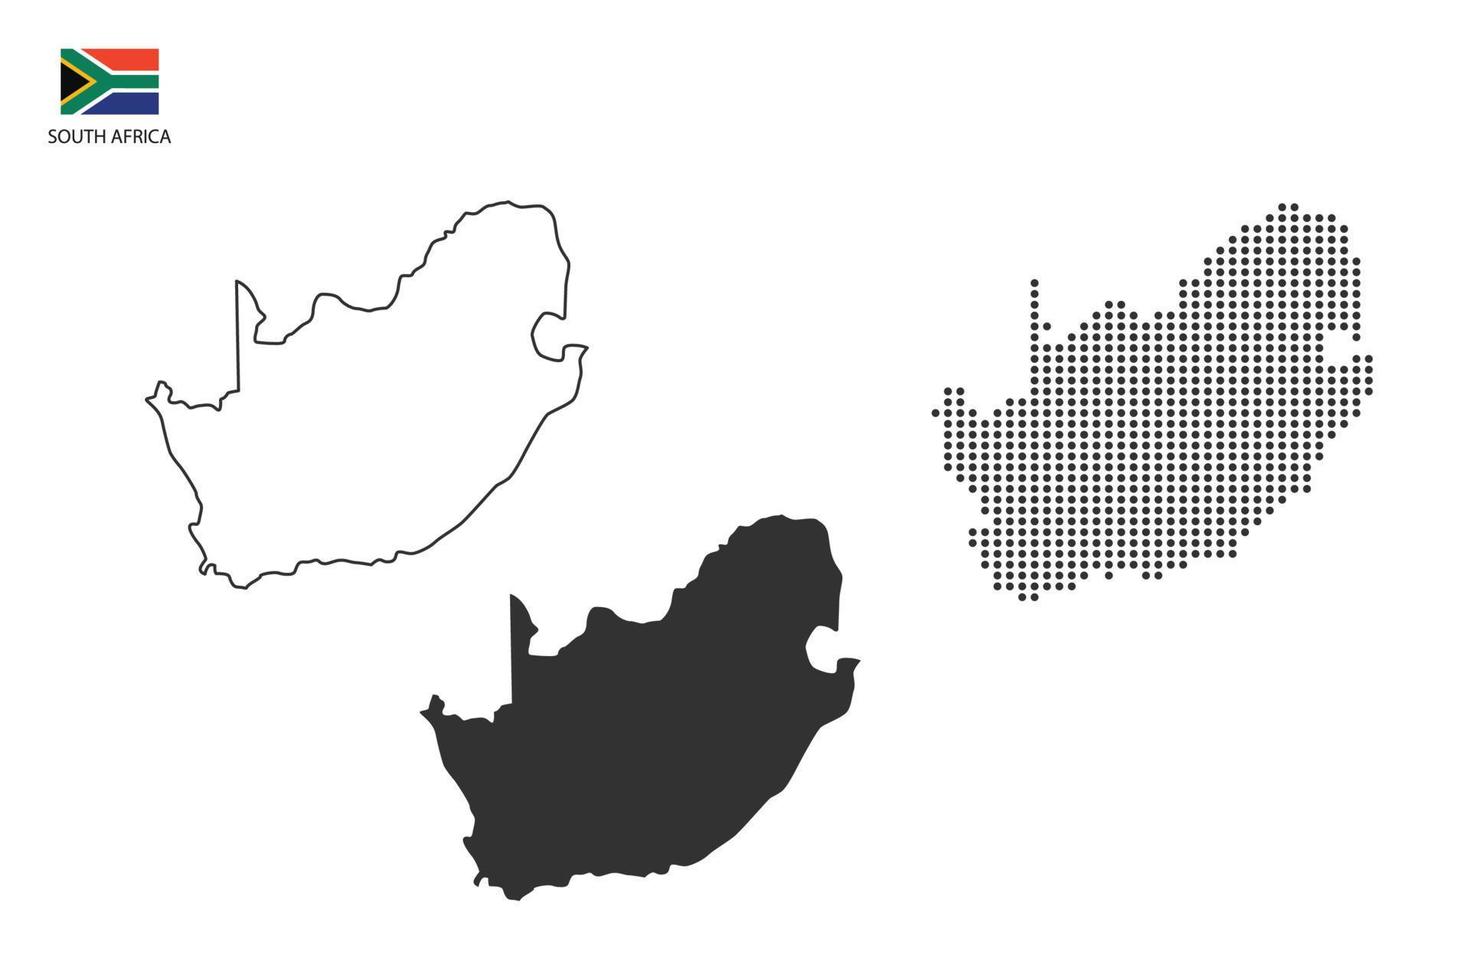 3 versions of South Africa map city vector by thin black outline simplicity style, Black dot style and Dark shadow style. All in the white background.